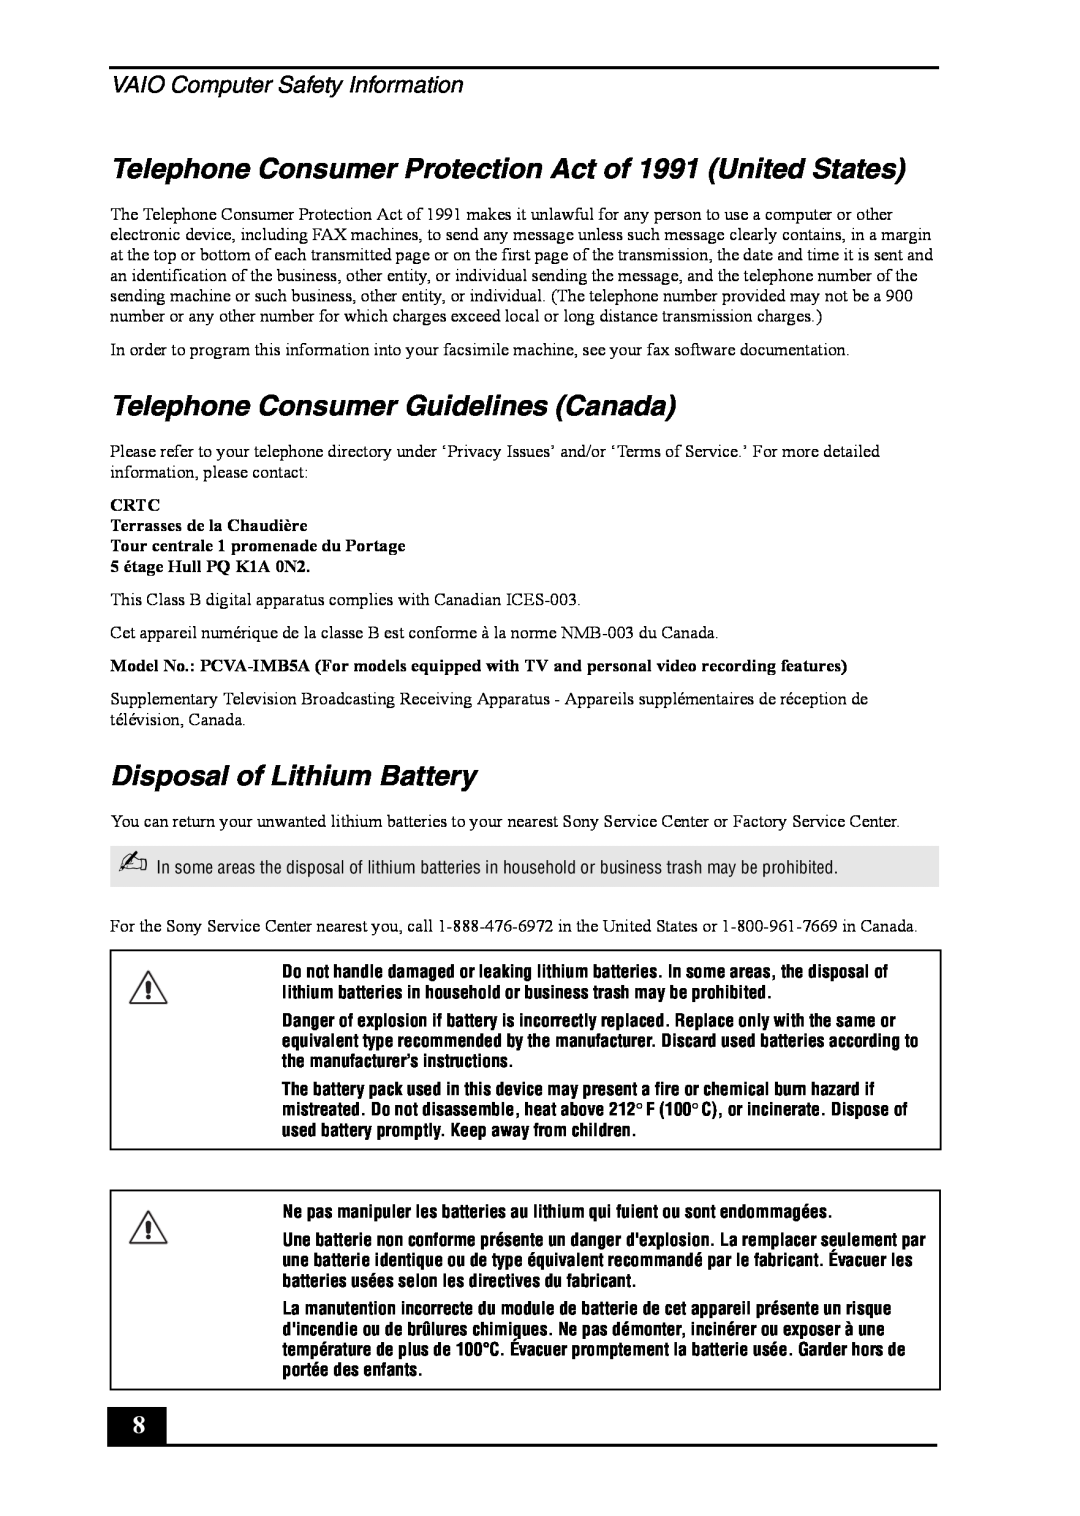 Sony VGC-RB50(G) manual Telephone Consumer Protection Act of 1991 United States, Telephone Consumer Guidelines Canada 